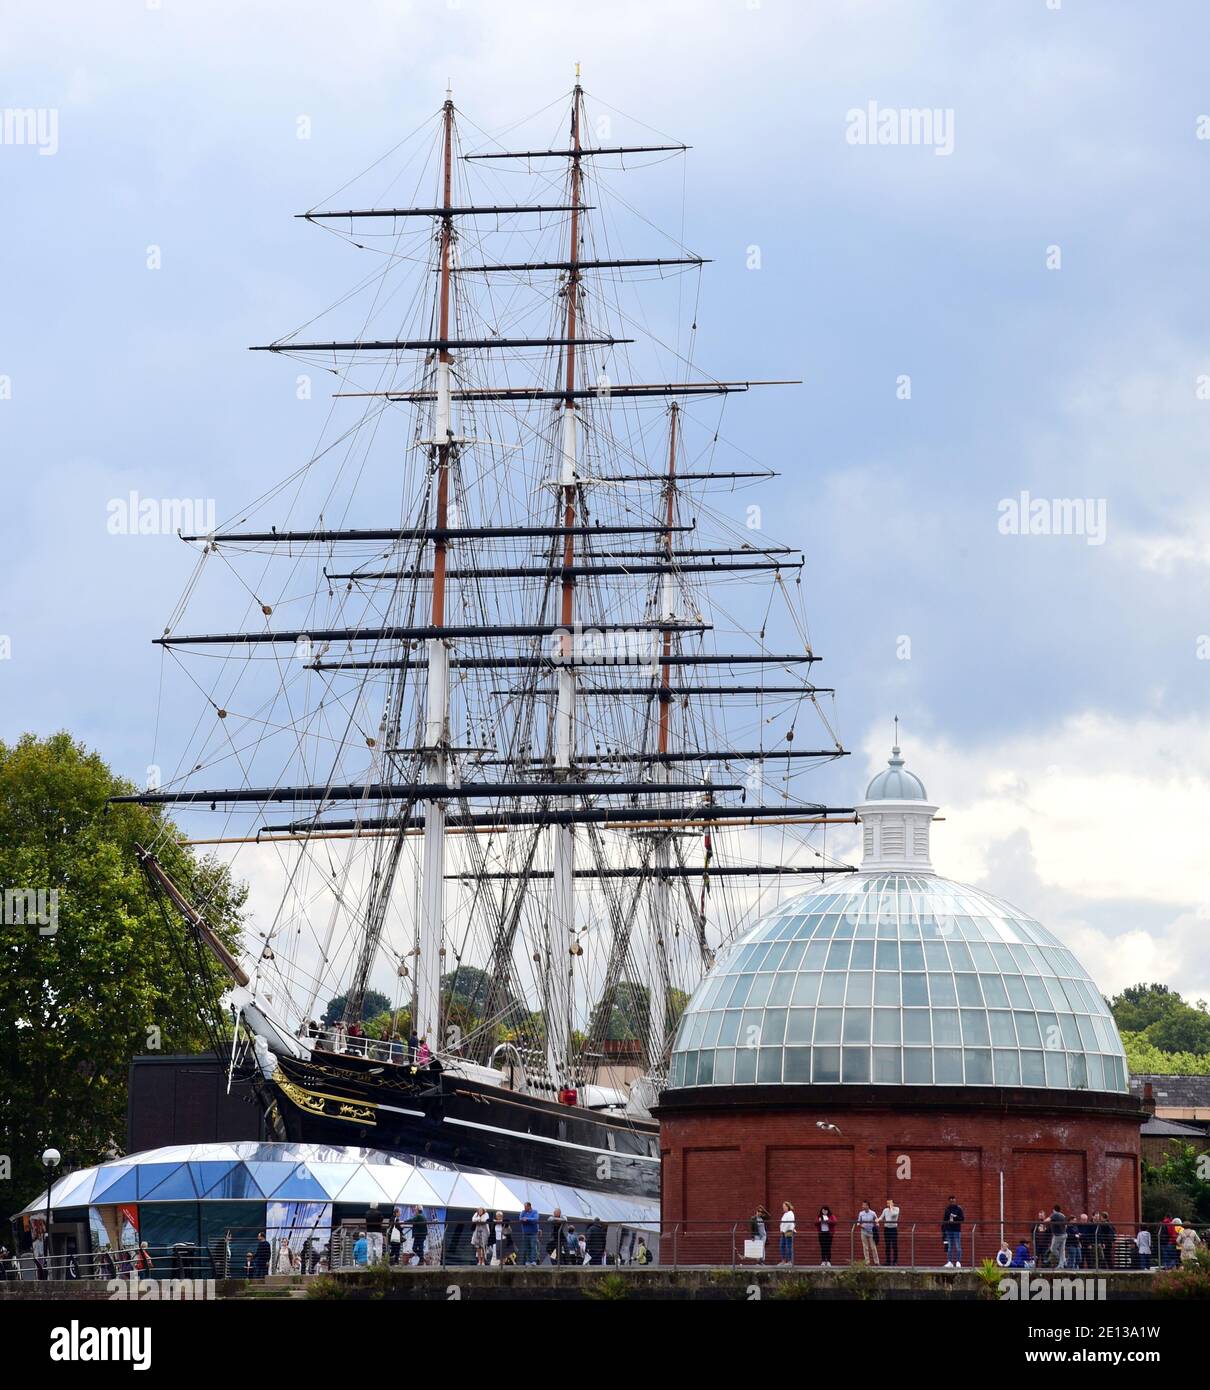 London, UK. 07th Sep, 2019. The three-masted Cutty Sark, 150 years ago as a tea clipper between China and England, lies today in the dry dock of Greenwich for sightseeing. Credit: Waltraud Grubitzsch/dpa-Zentralbild/ZB/dpa/Alamy Live News Stock Photo